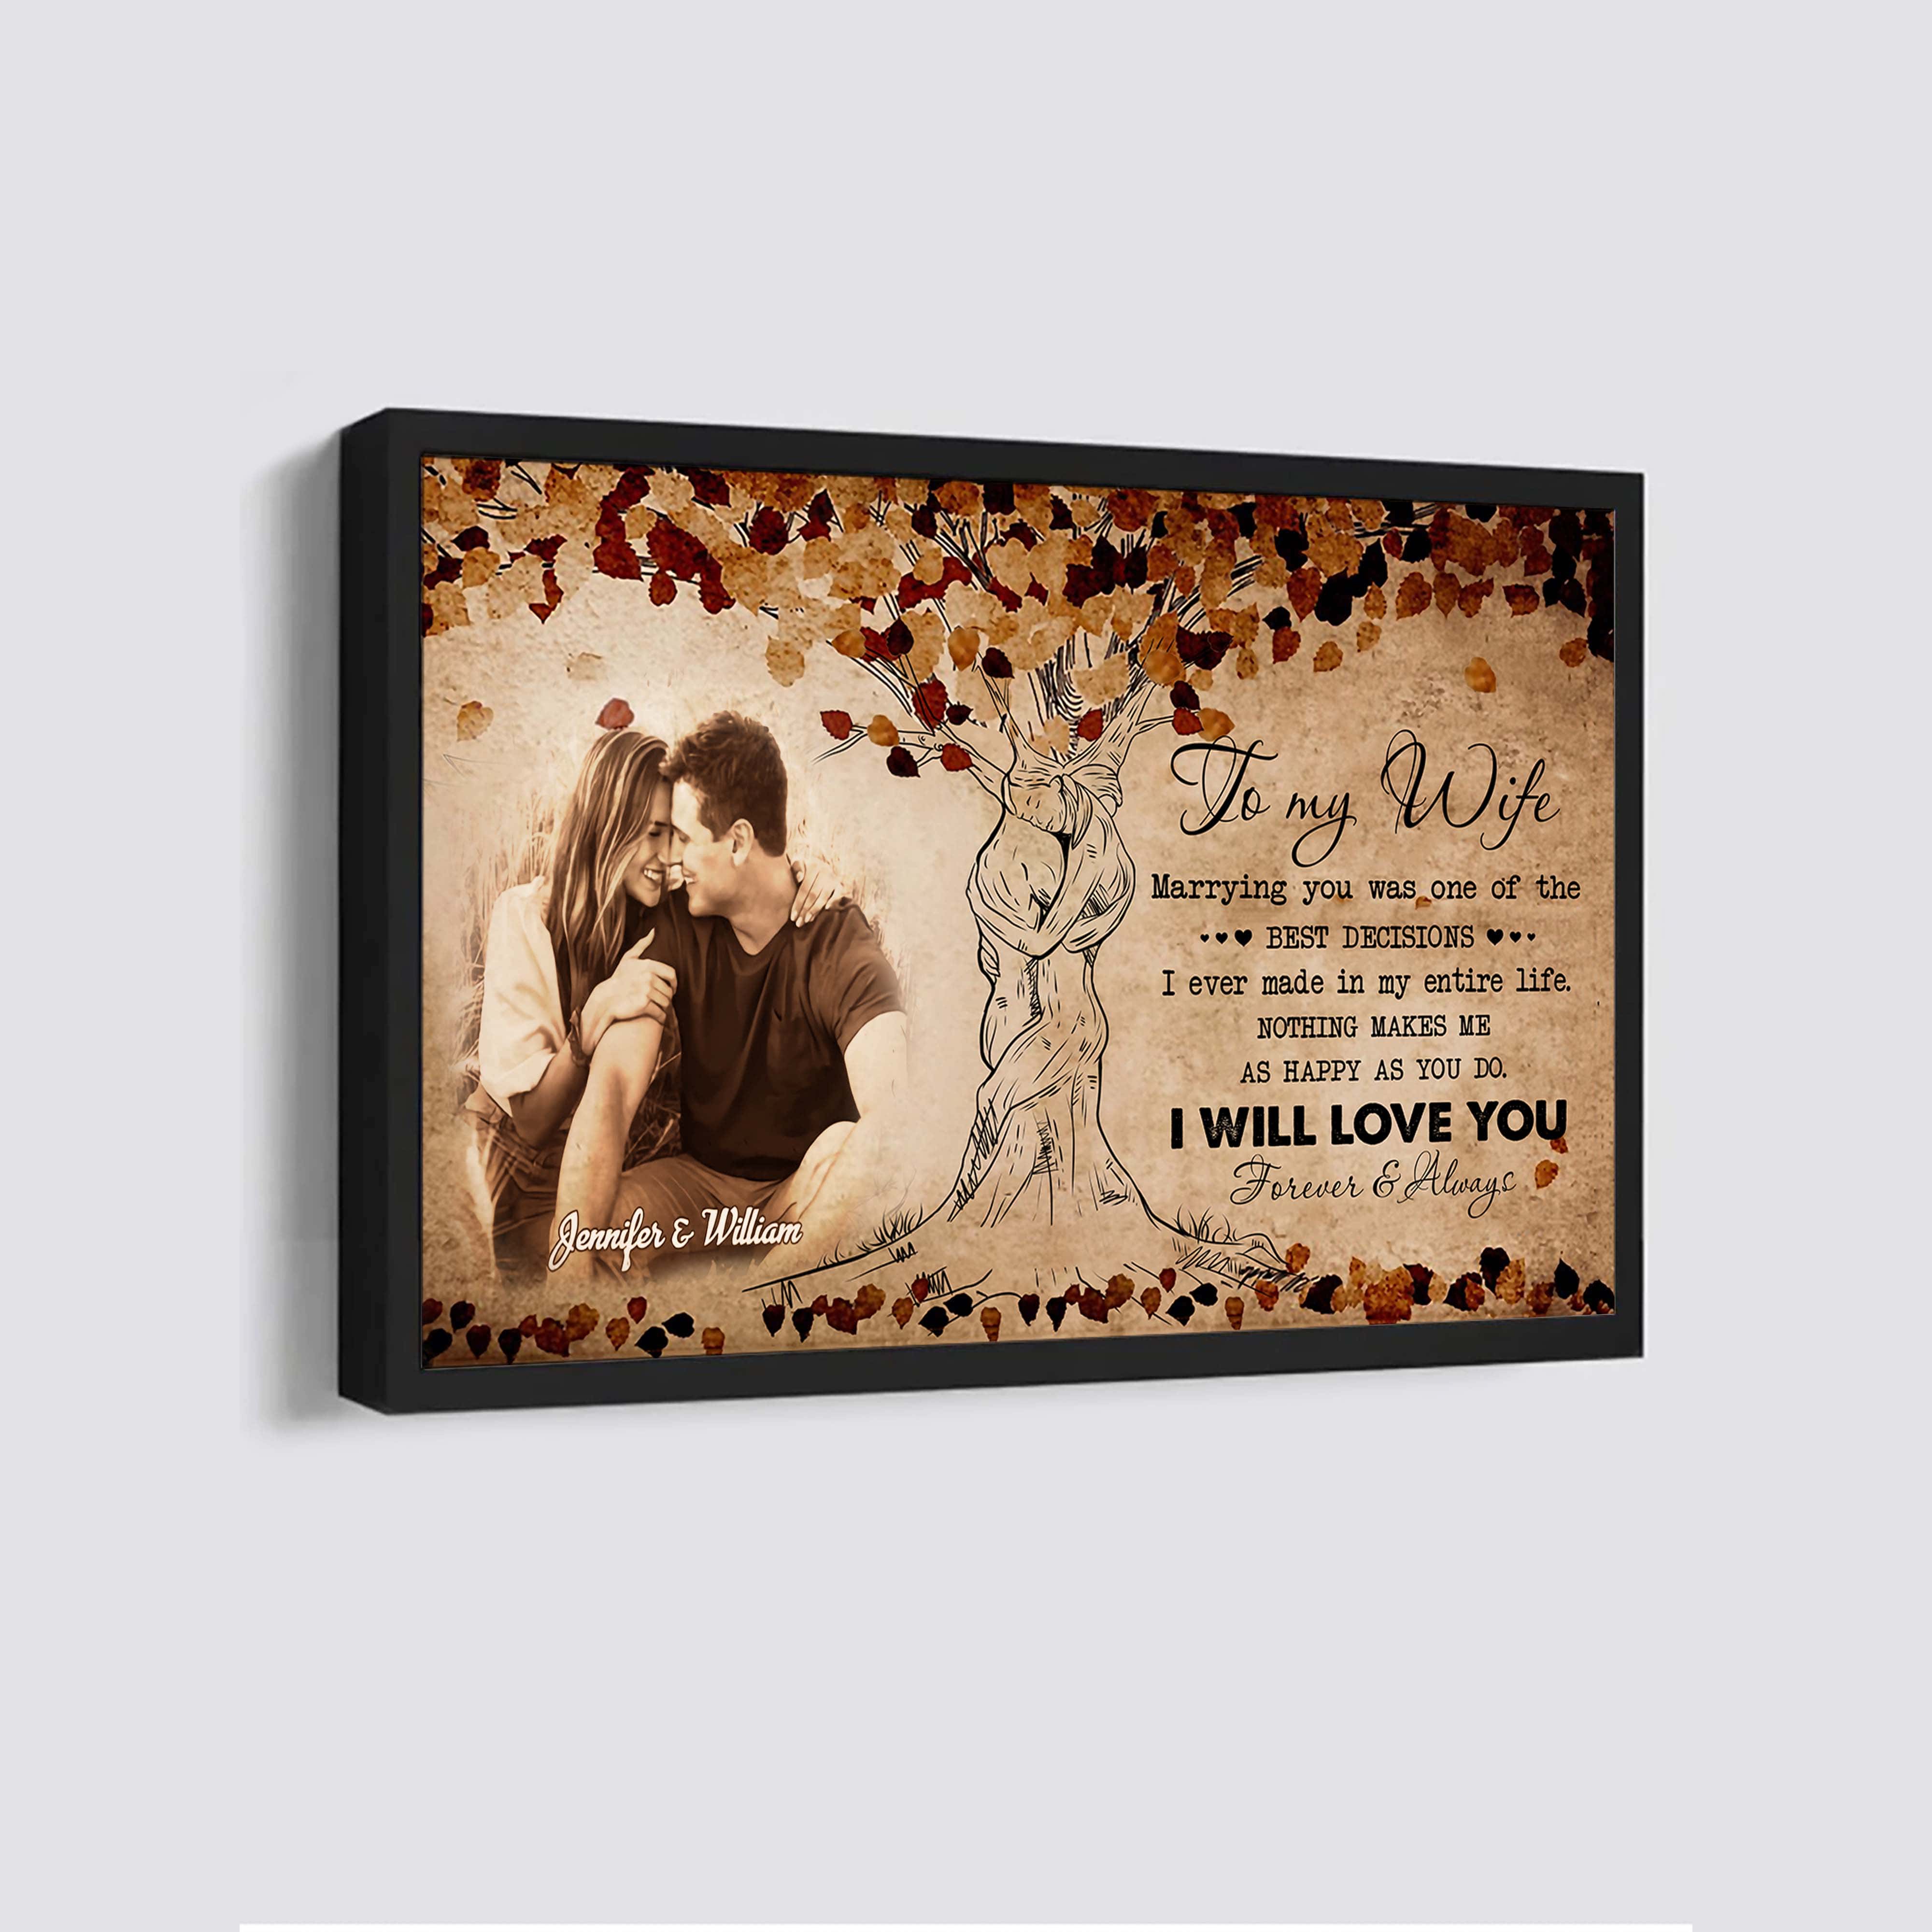 Valentines gifts-Poster canvas-Custom Image- Husband to Wife- I wish I could turn back the clock